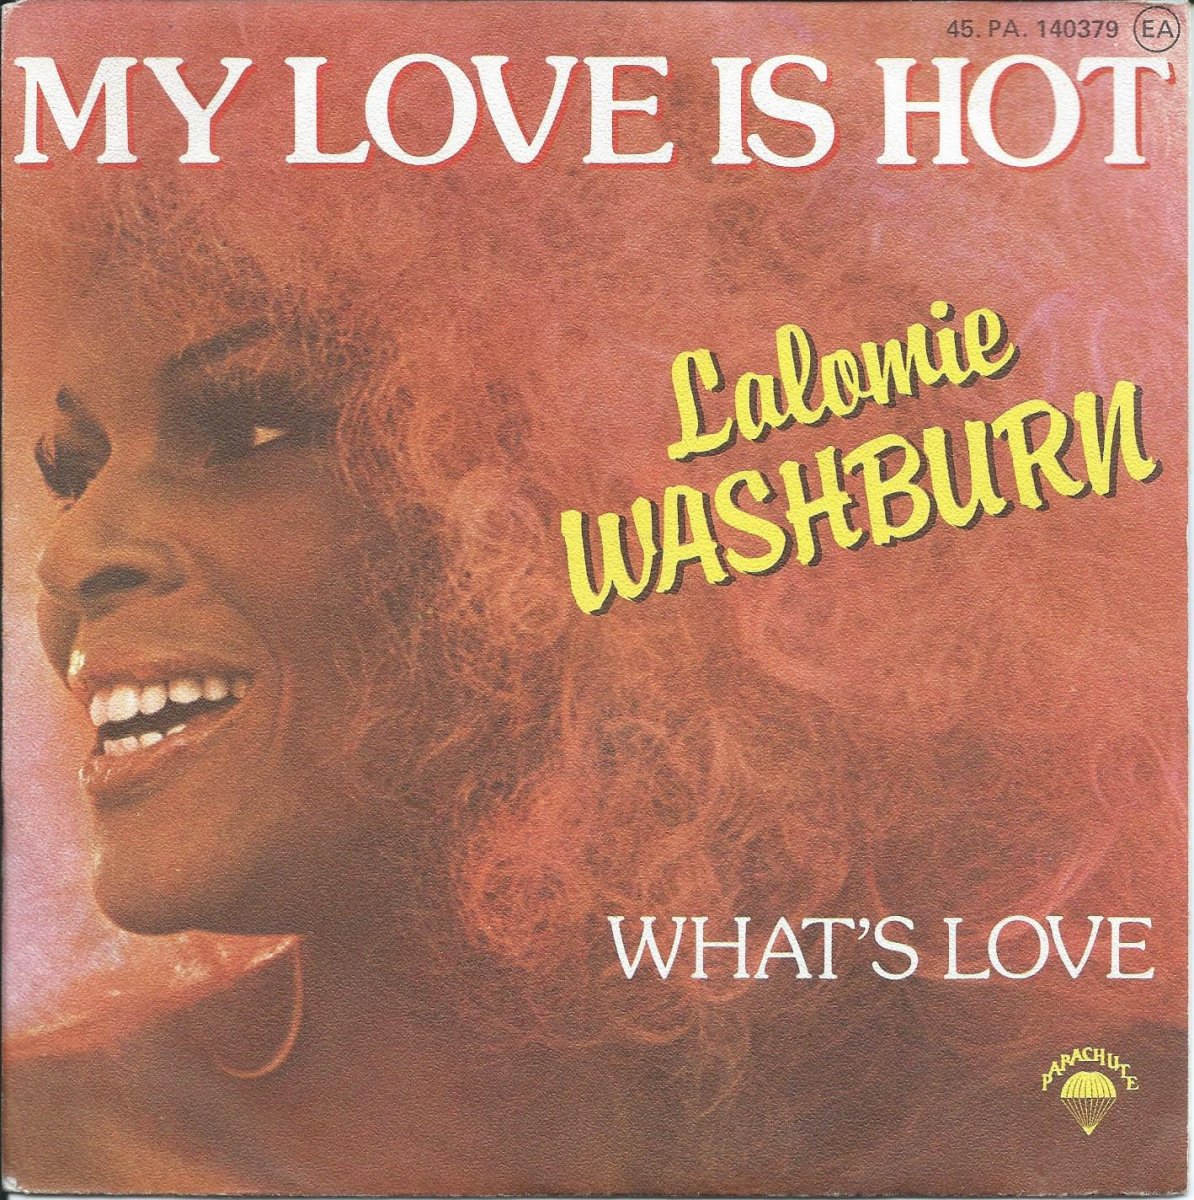 LALOMIE WASHBURN ‎/ MY LOVE IS HOT (CALIENTE UN AMOUR) / WHAT'S LOVE (7